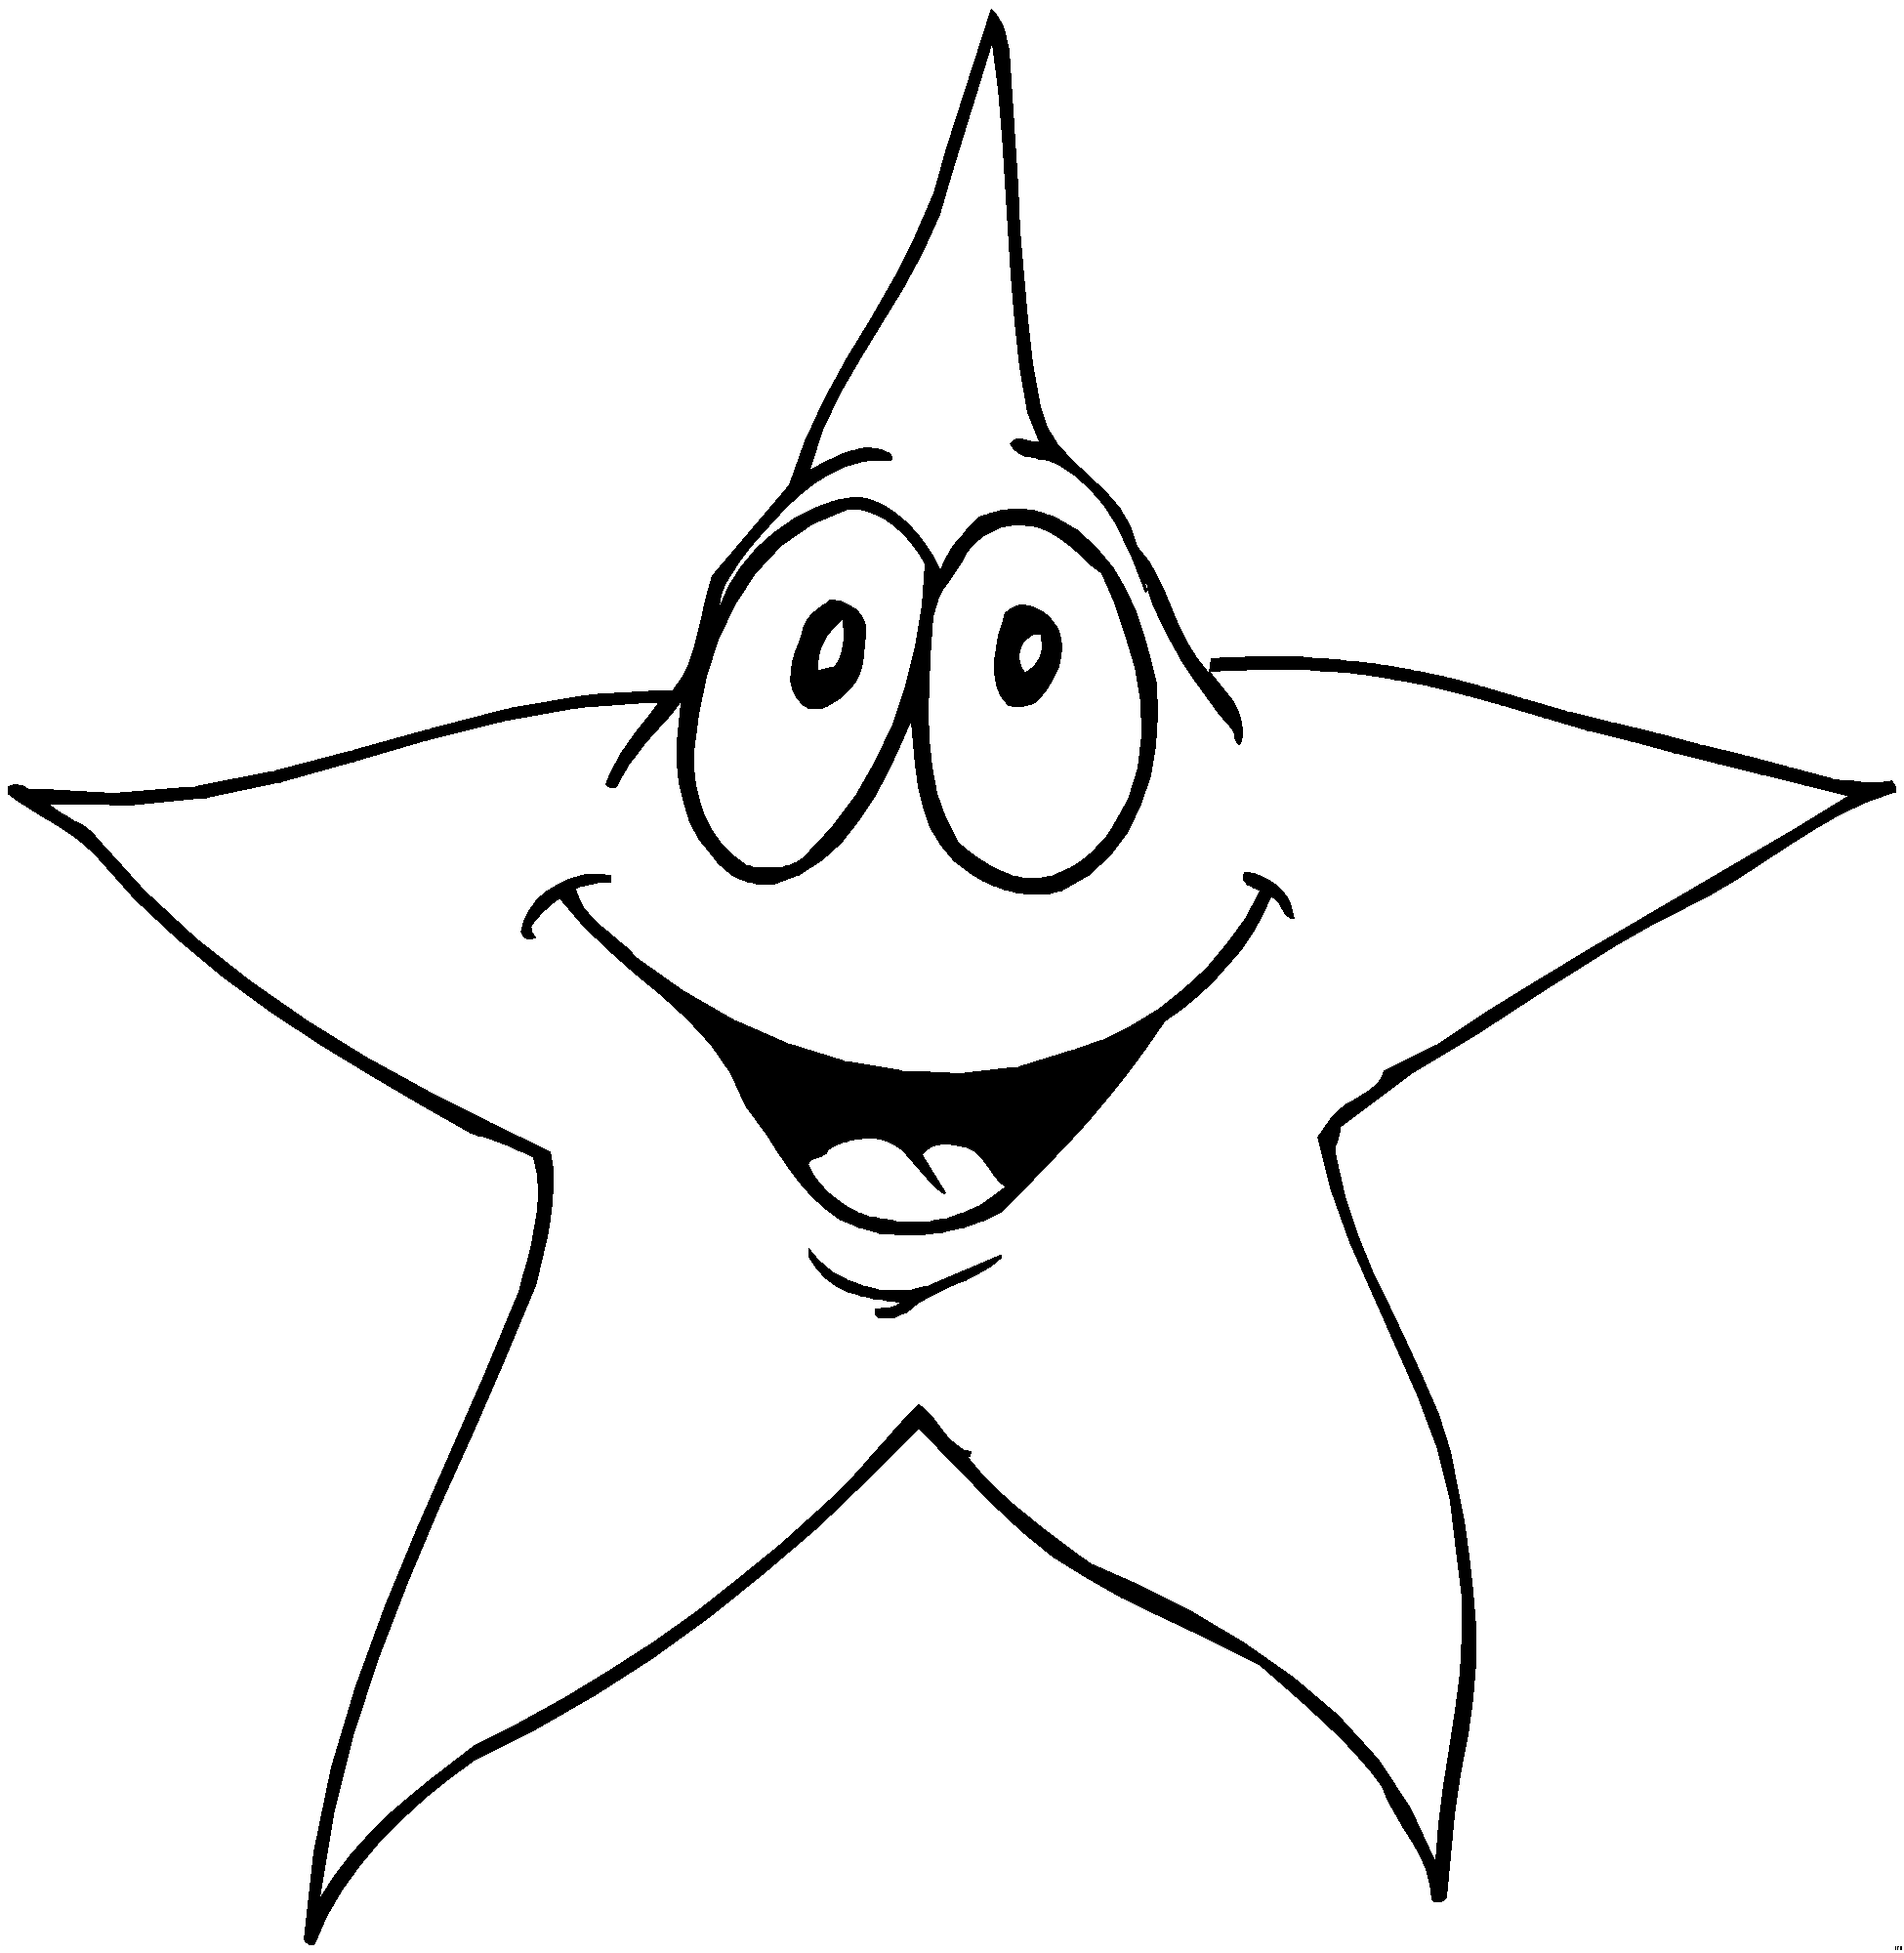 stars to colour and print free printable star coloring pages for kids to and colour stars print 